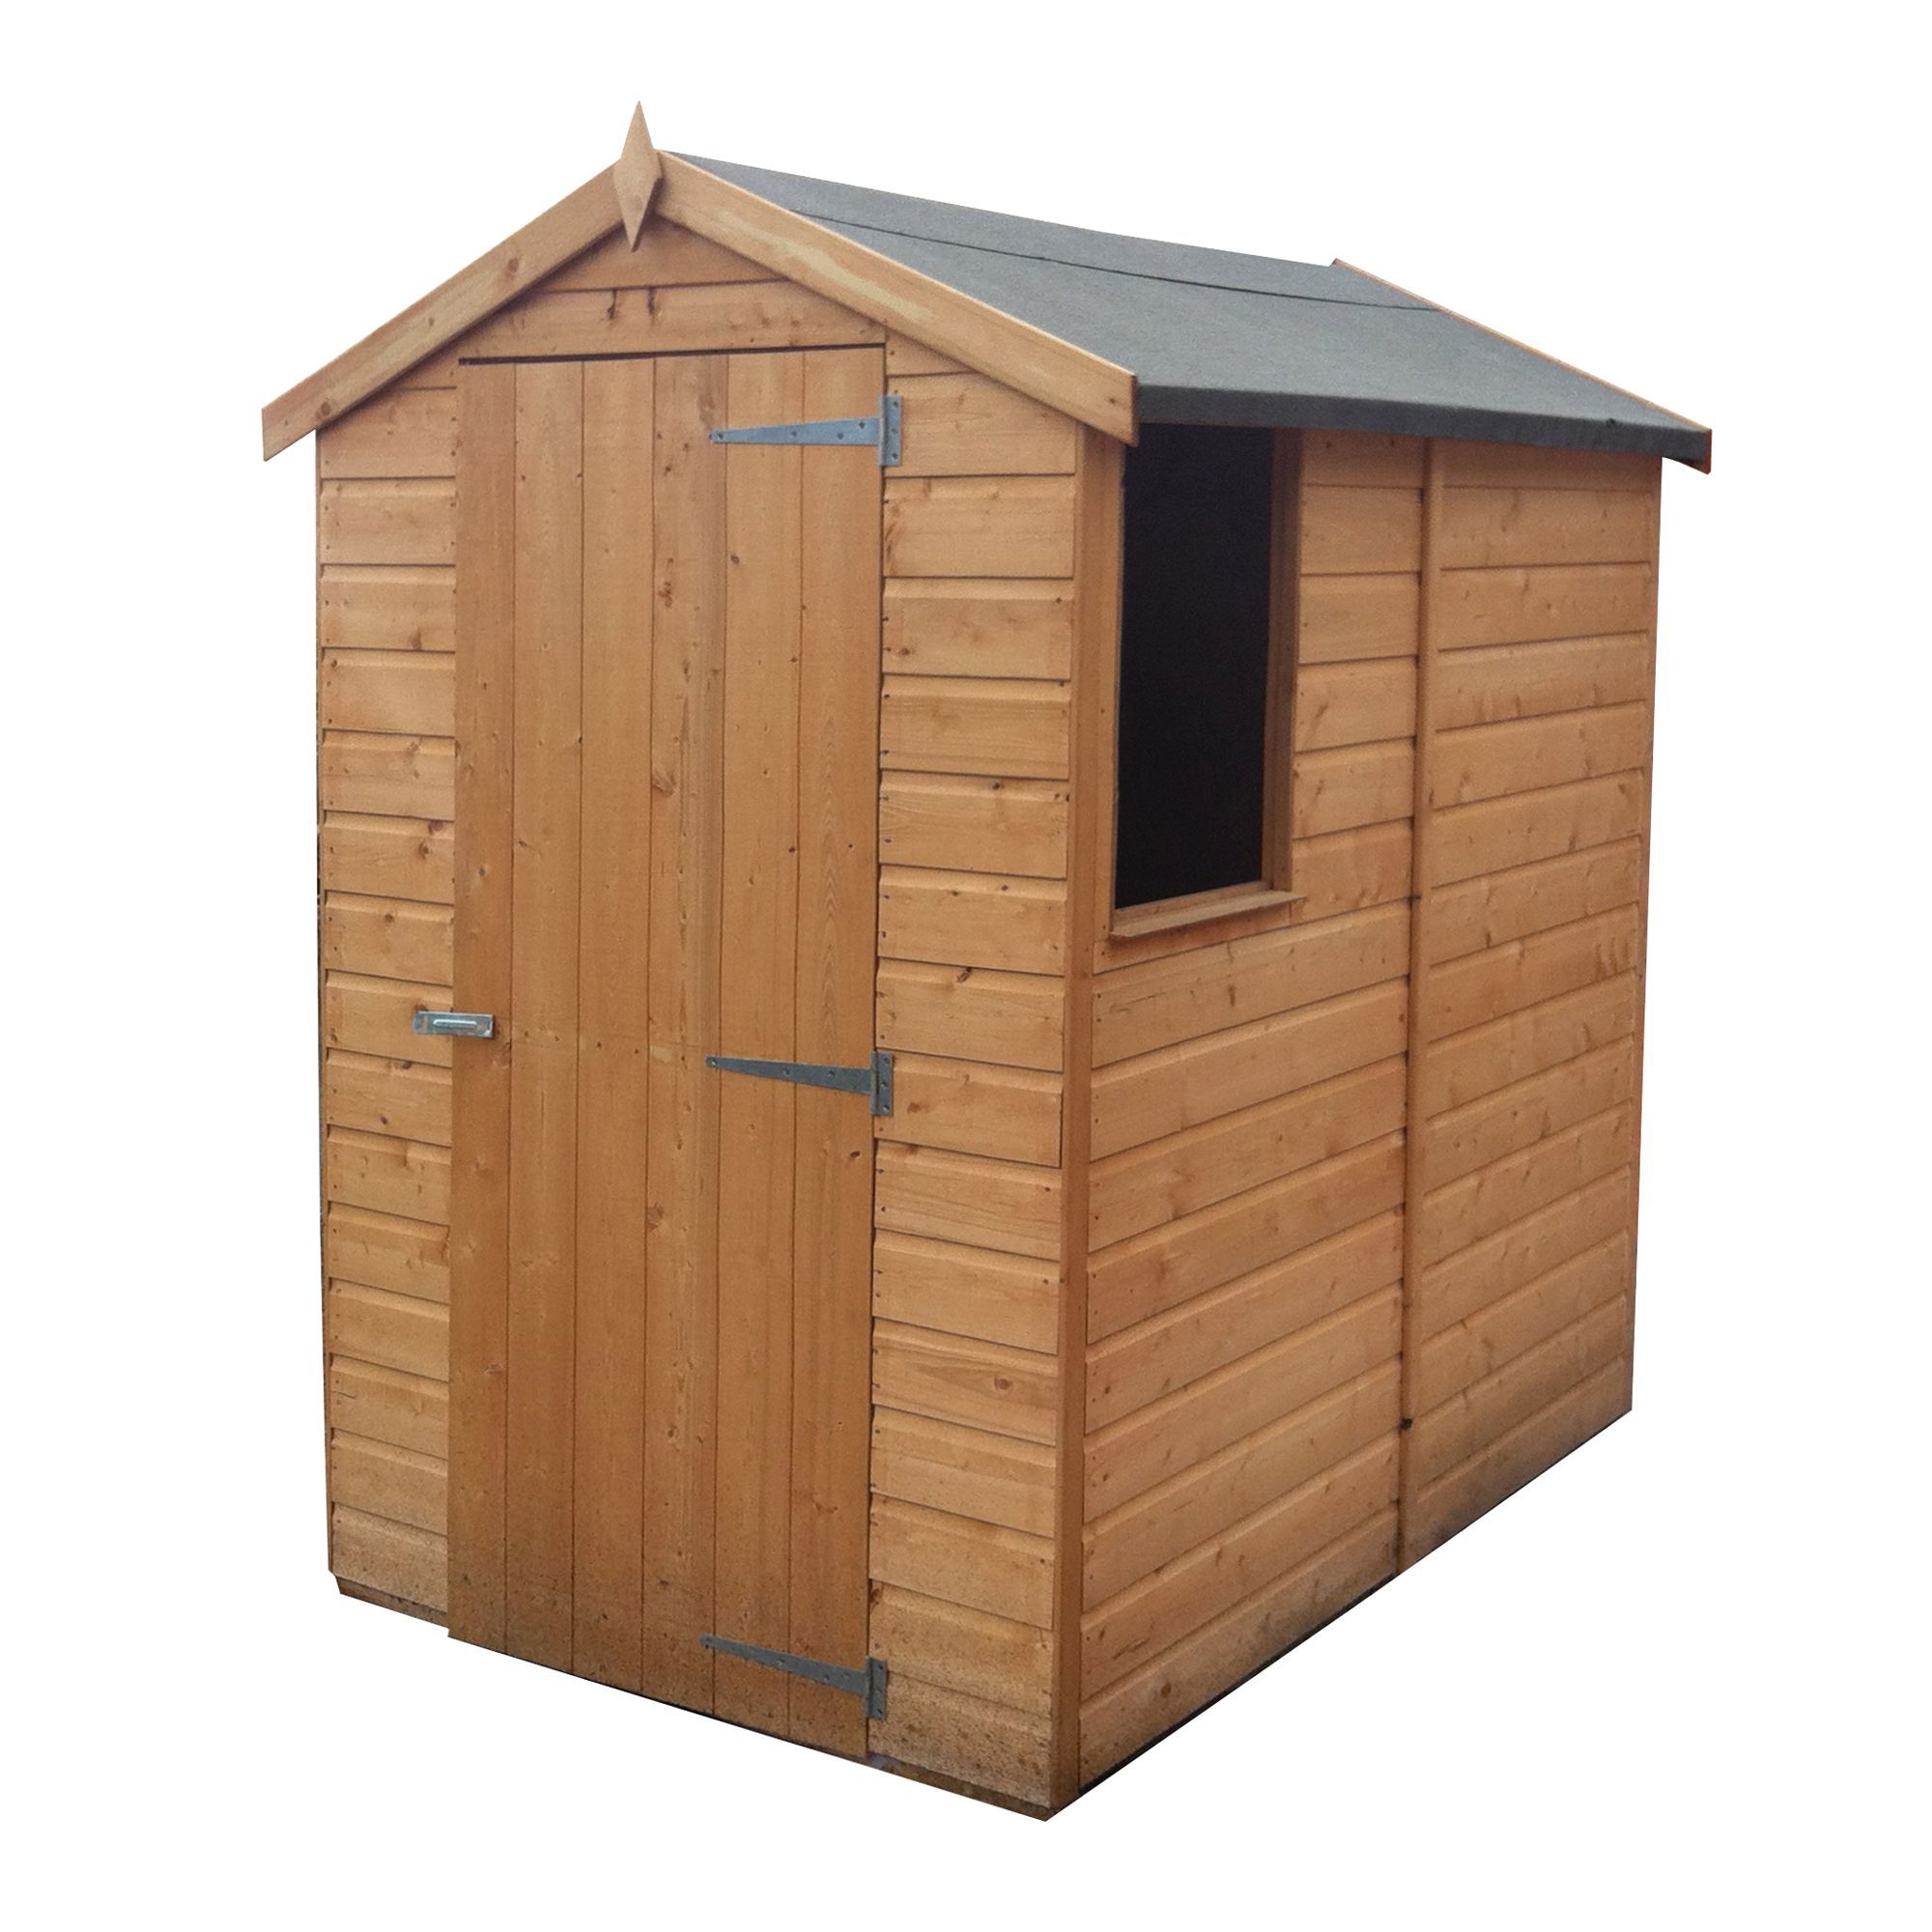 Shire Shetland 6x4 ft Apex Wooden Shed with floor & 1 window - Assembly service included